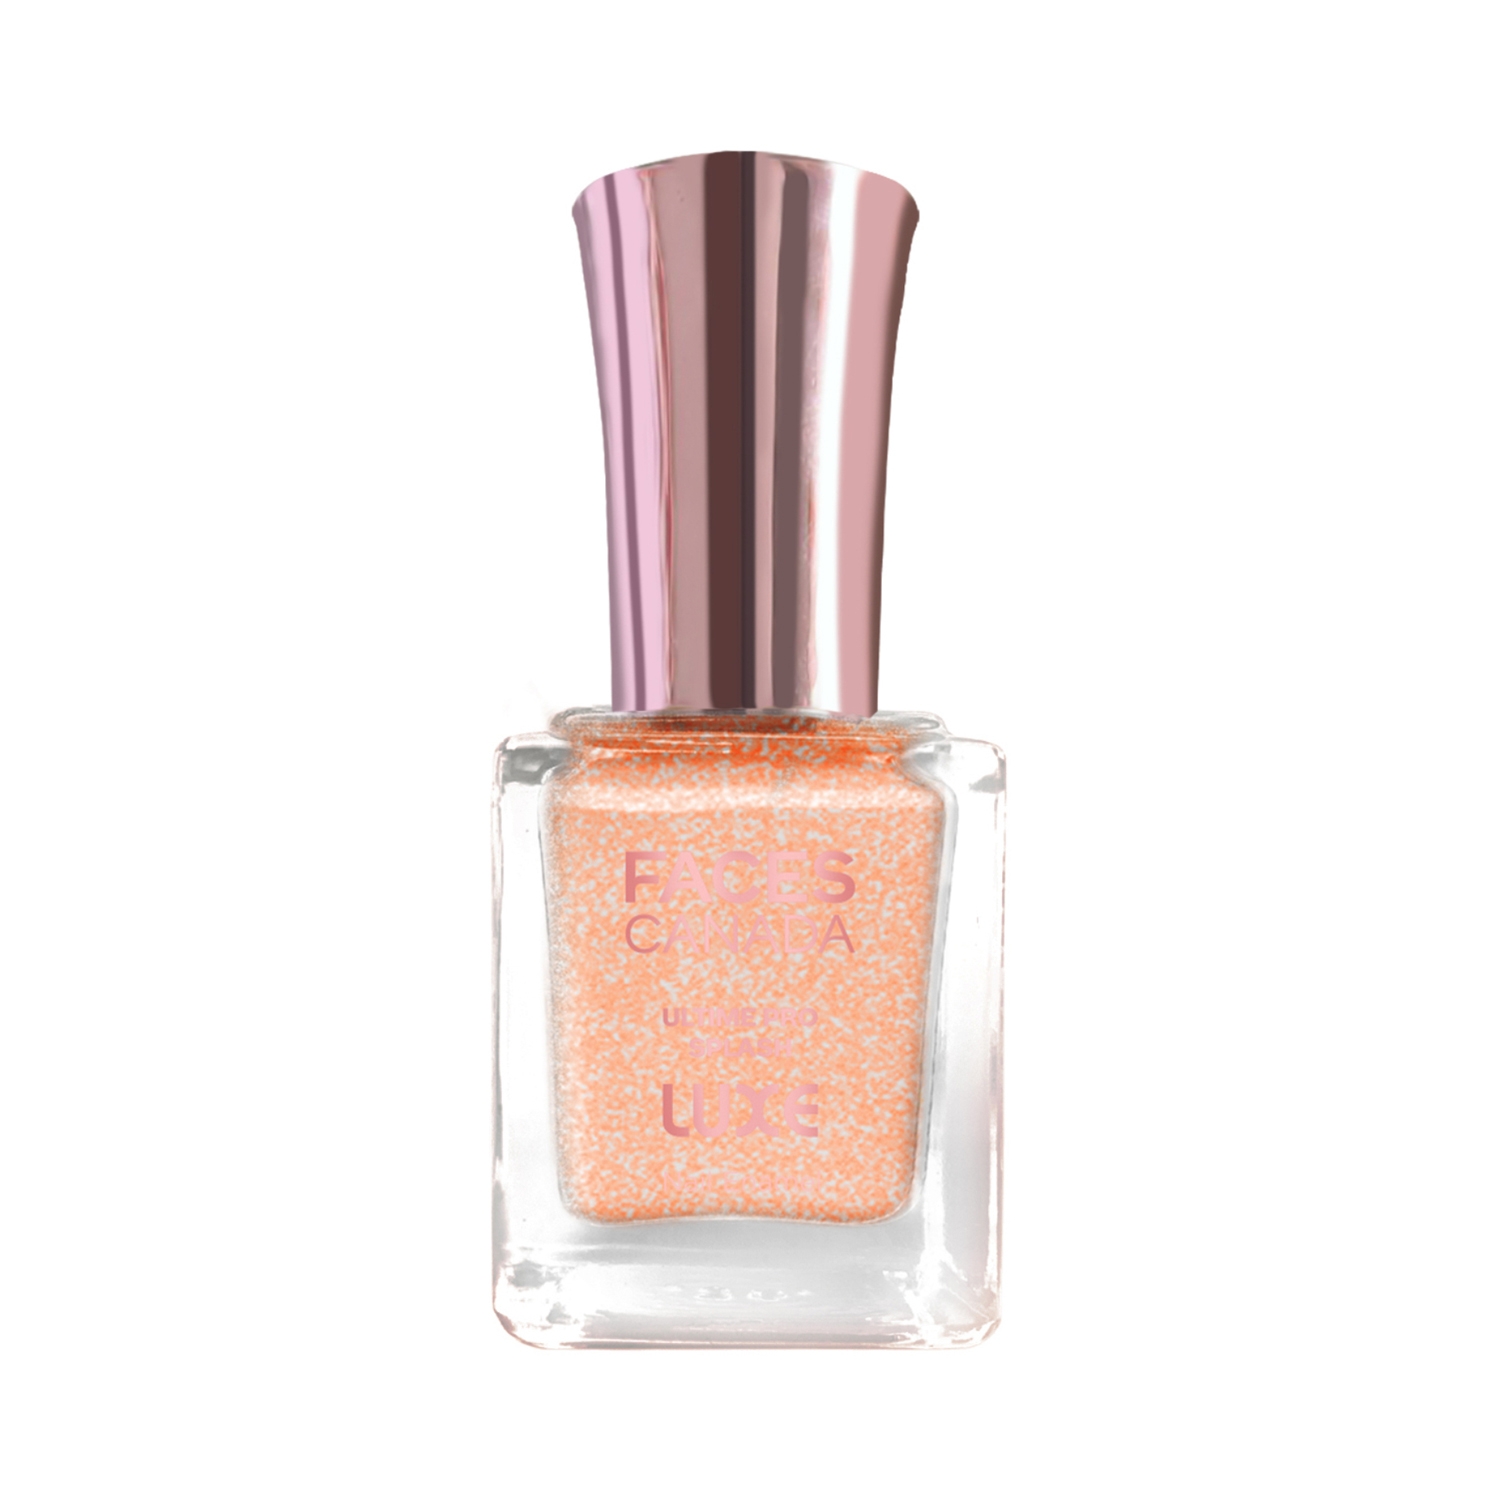 Faces Canada | Faces Canada Ultime Pro Splash Luxe Nail Enamel - L16 Be Dazzling (12ml)